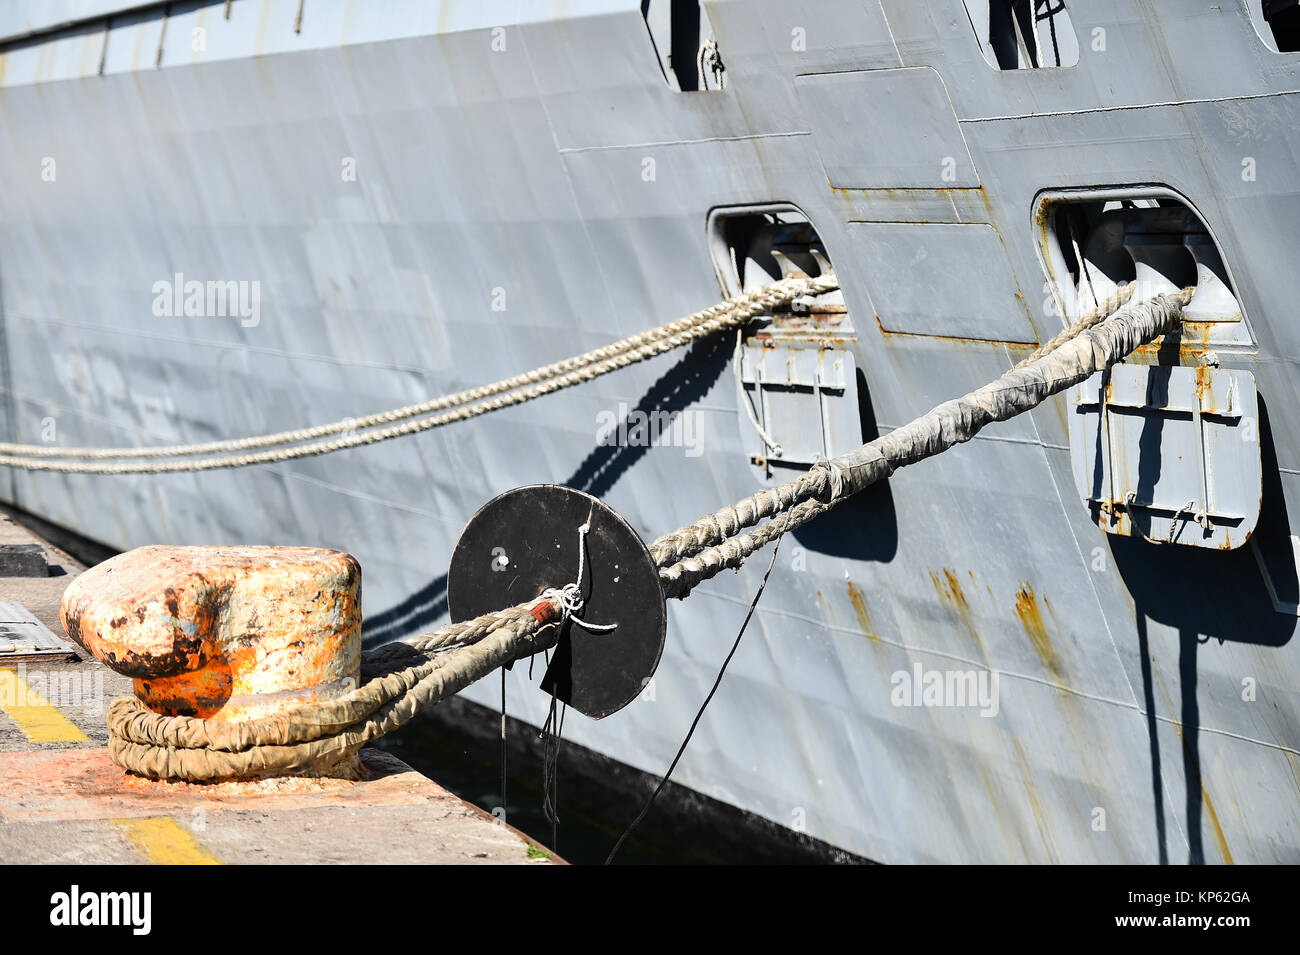 Mooring heavy duty rope used for securing ships in harbor Stock Photo